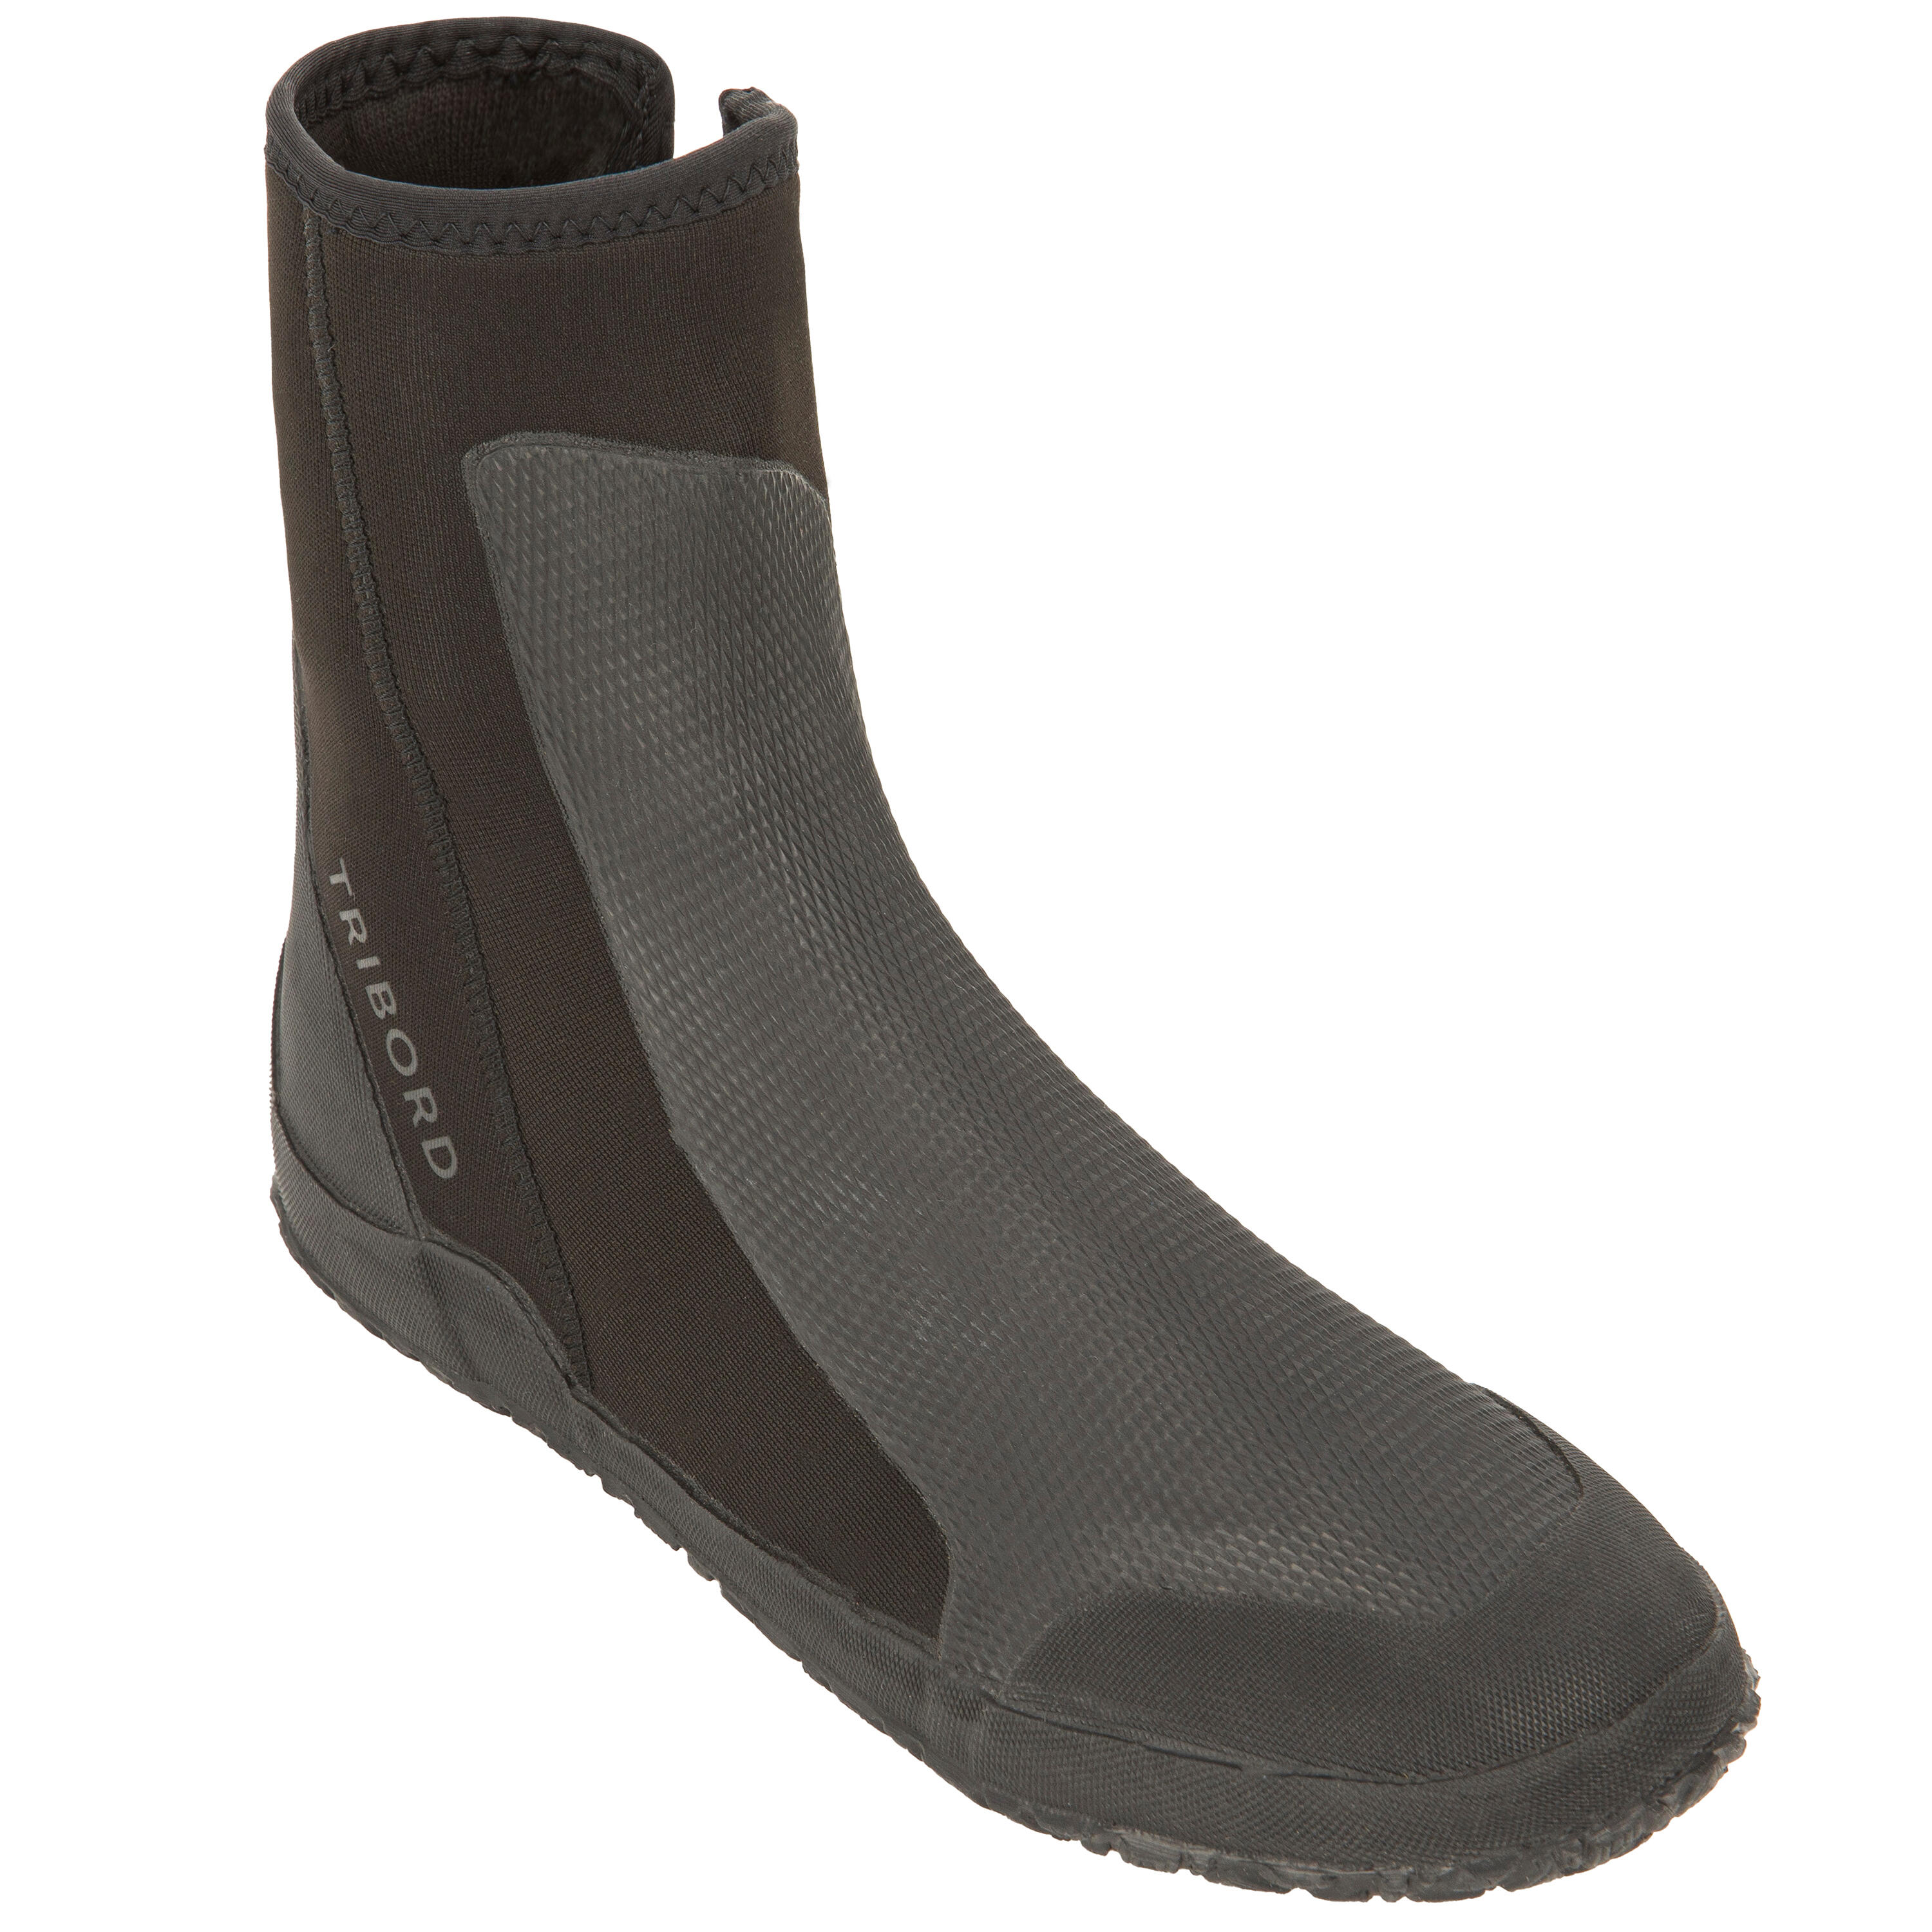 Neoprene Boots for Sailing